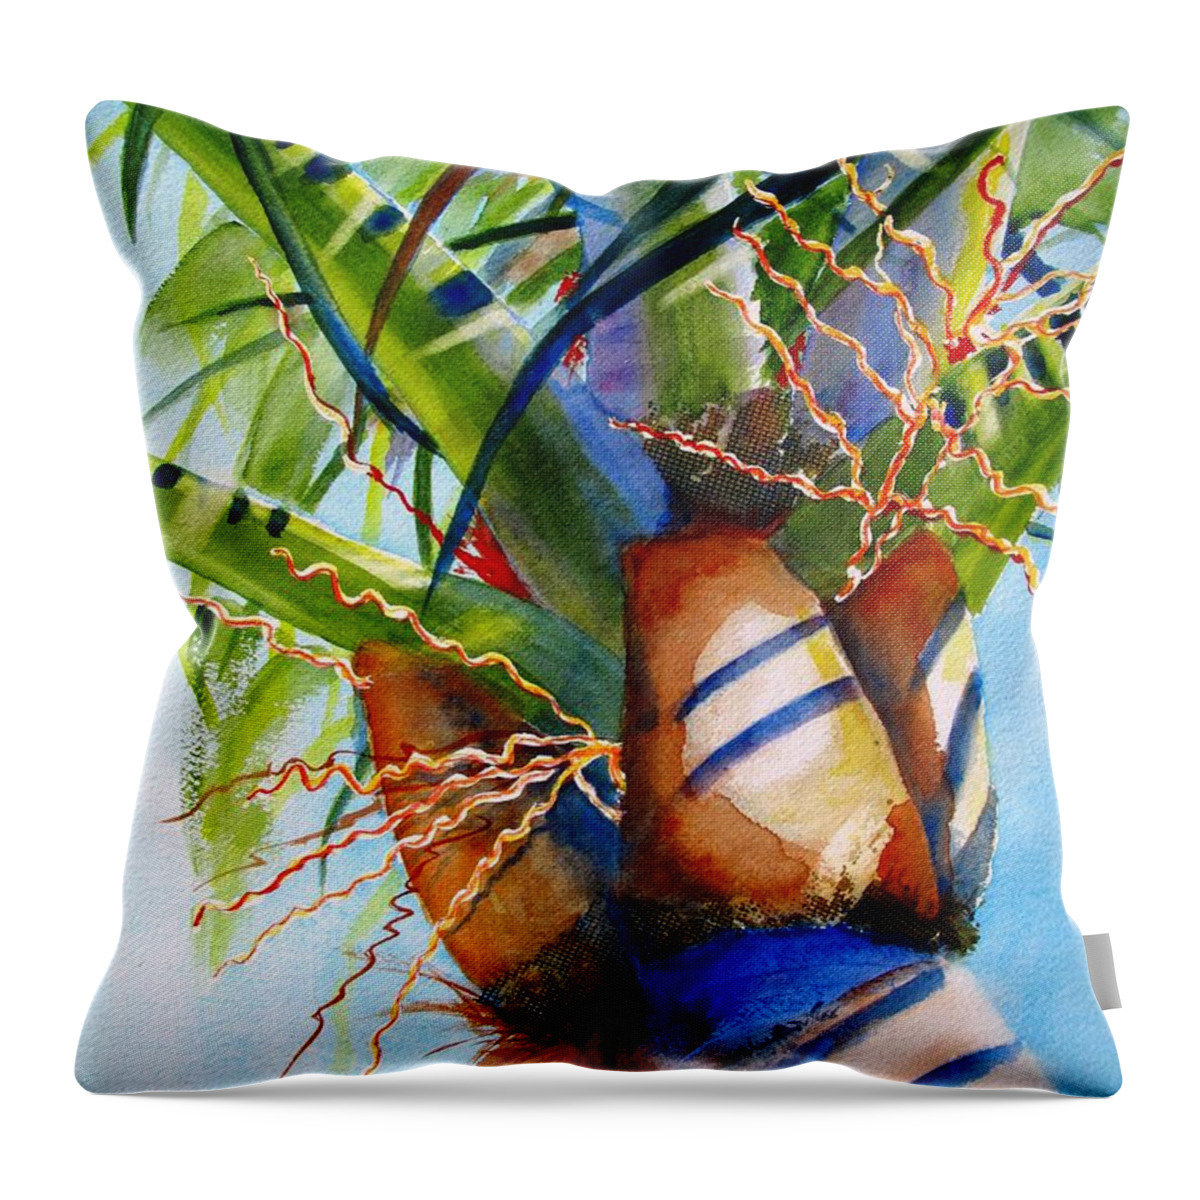 Palm Throw Pillow featuring the painting Sunlit Palm by Carlin Blahnik CarlinArtWatercolor